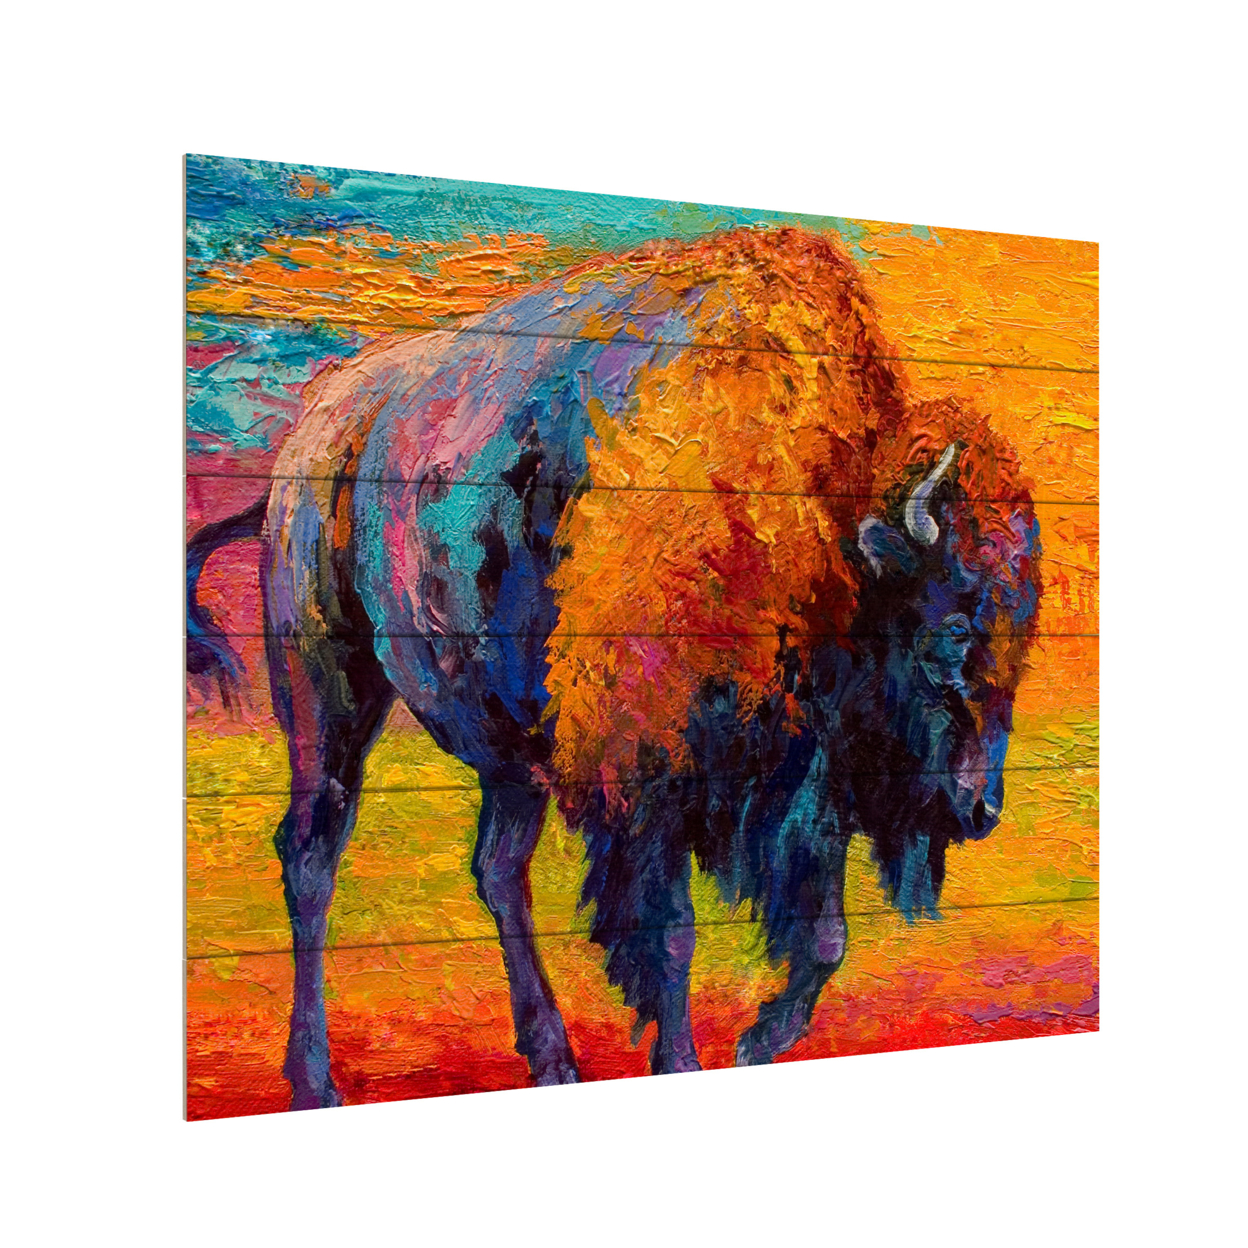 Wooden Slat Art 18 X 22 Inches Titled Spirit Of The Prairie Ready To Hang Home Decor Picture